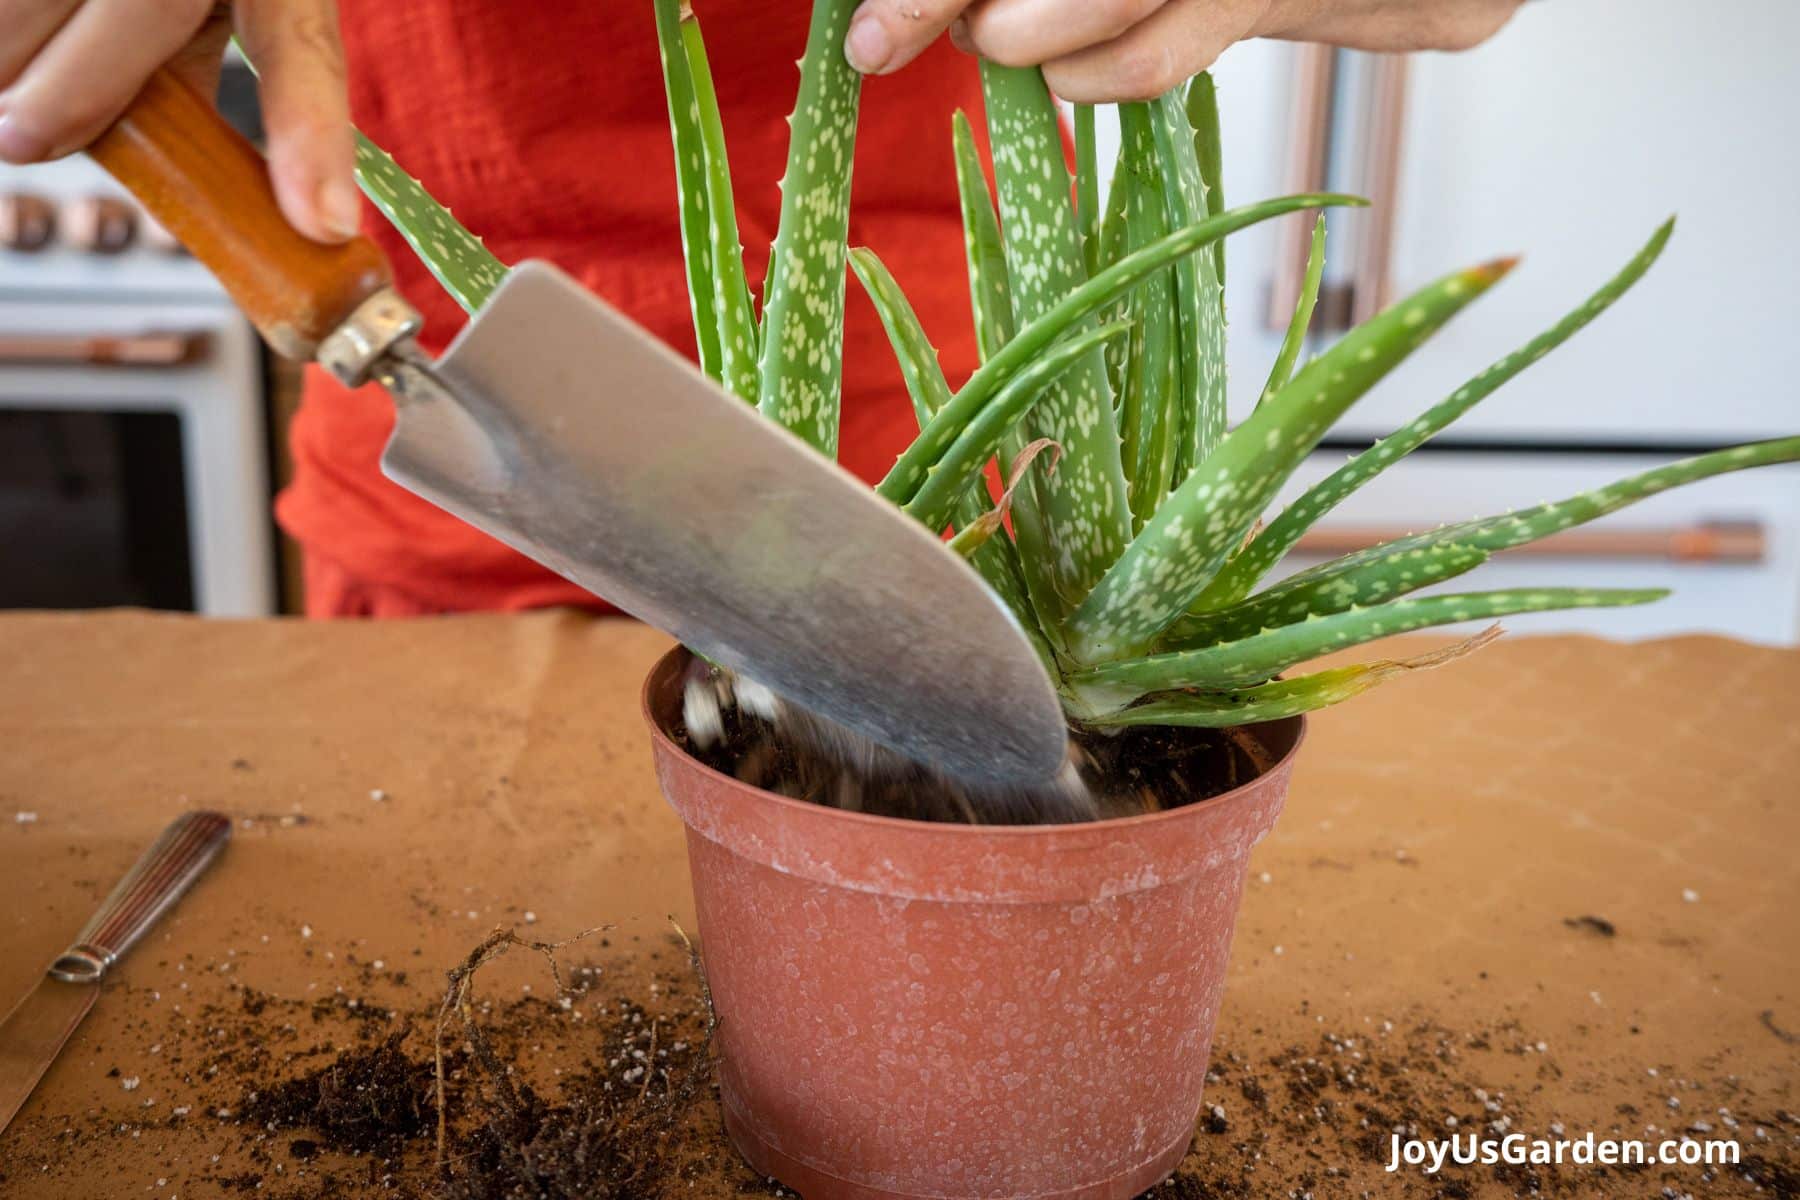 Aloe vera being planted into an orange plastic pot with a trowel in the foreground.